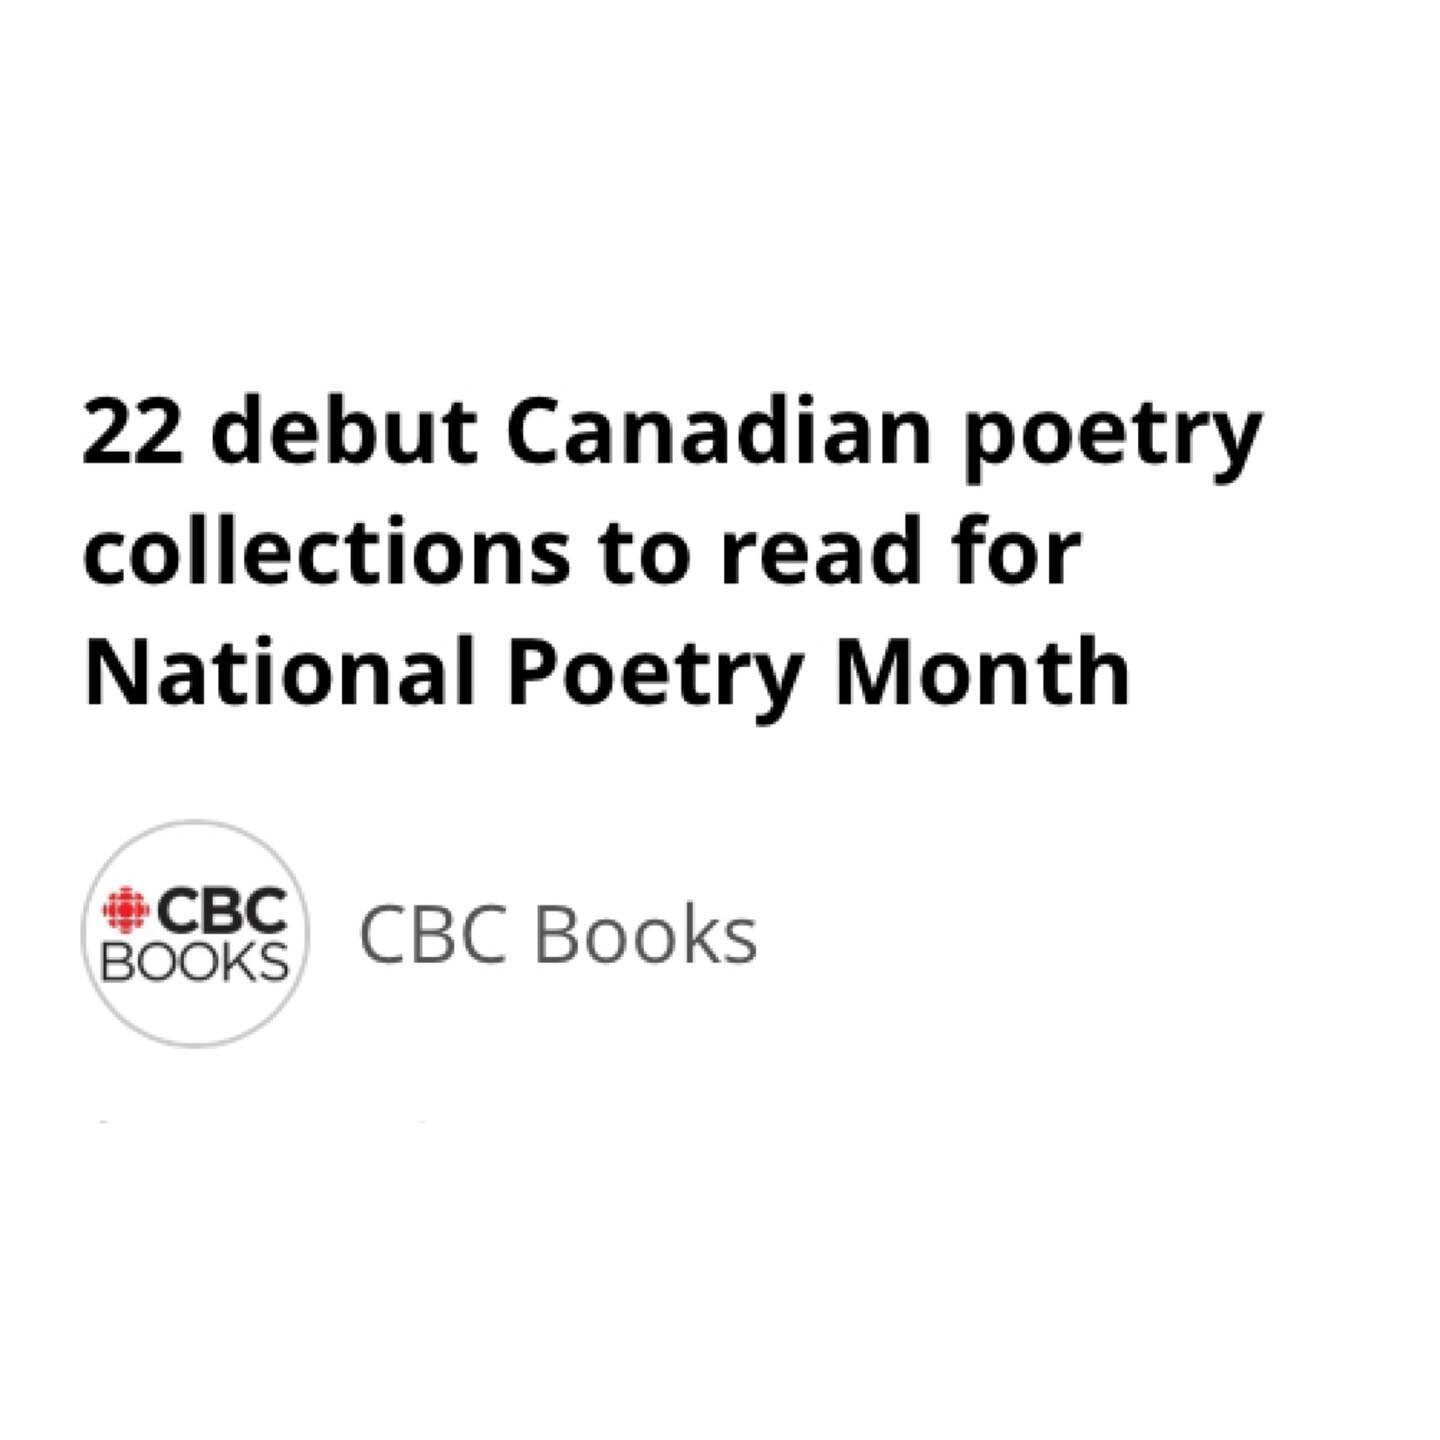 Well this is lovely, to be included on CBC Books&rsquo; list of debut poetry collections to read for #nationalpoetrymonth, + in such fine company 🤩🤩 

Grateful to @cbcbooks 🙏🏻

Take a gander at the list (link in bio under &ldquo;latest news&rdquo